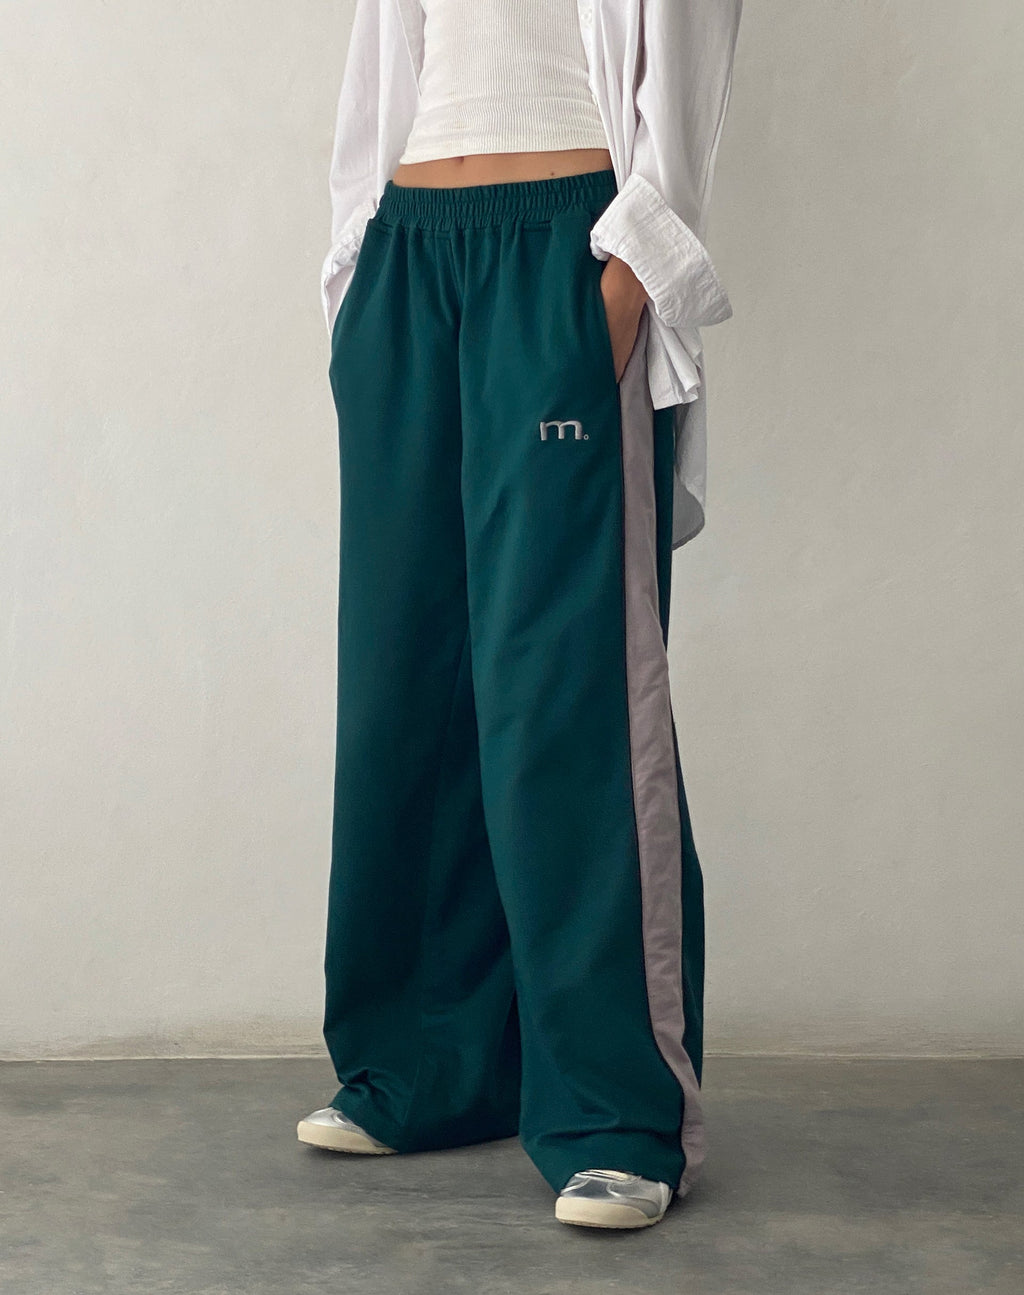 Bedion Oversized Jogger in Forest Green with M Embro